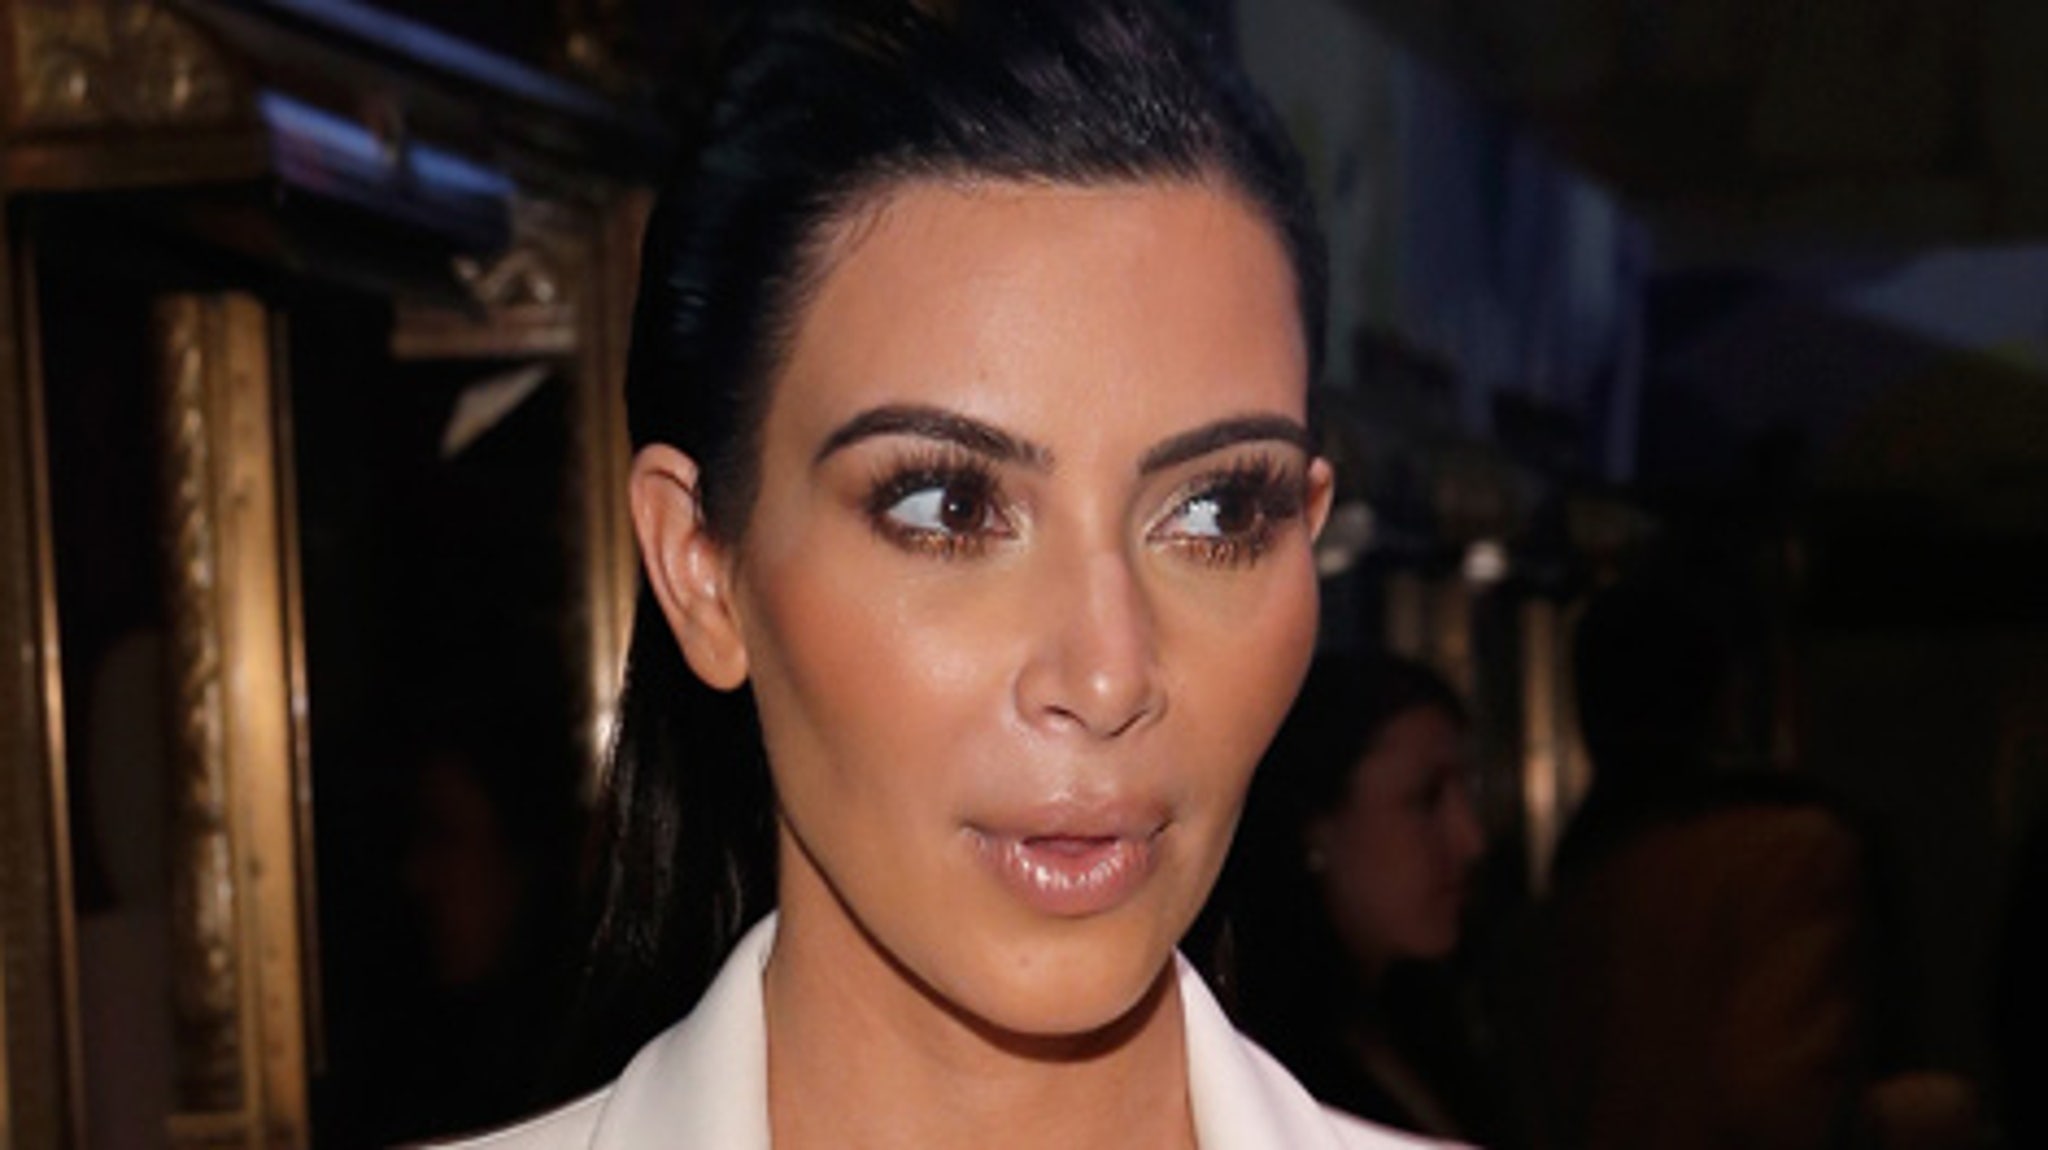 Kim Kardashian: I’m Excited for Bruce to Tell His Story